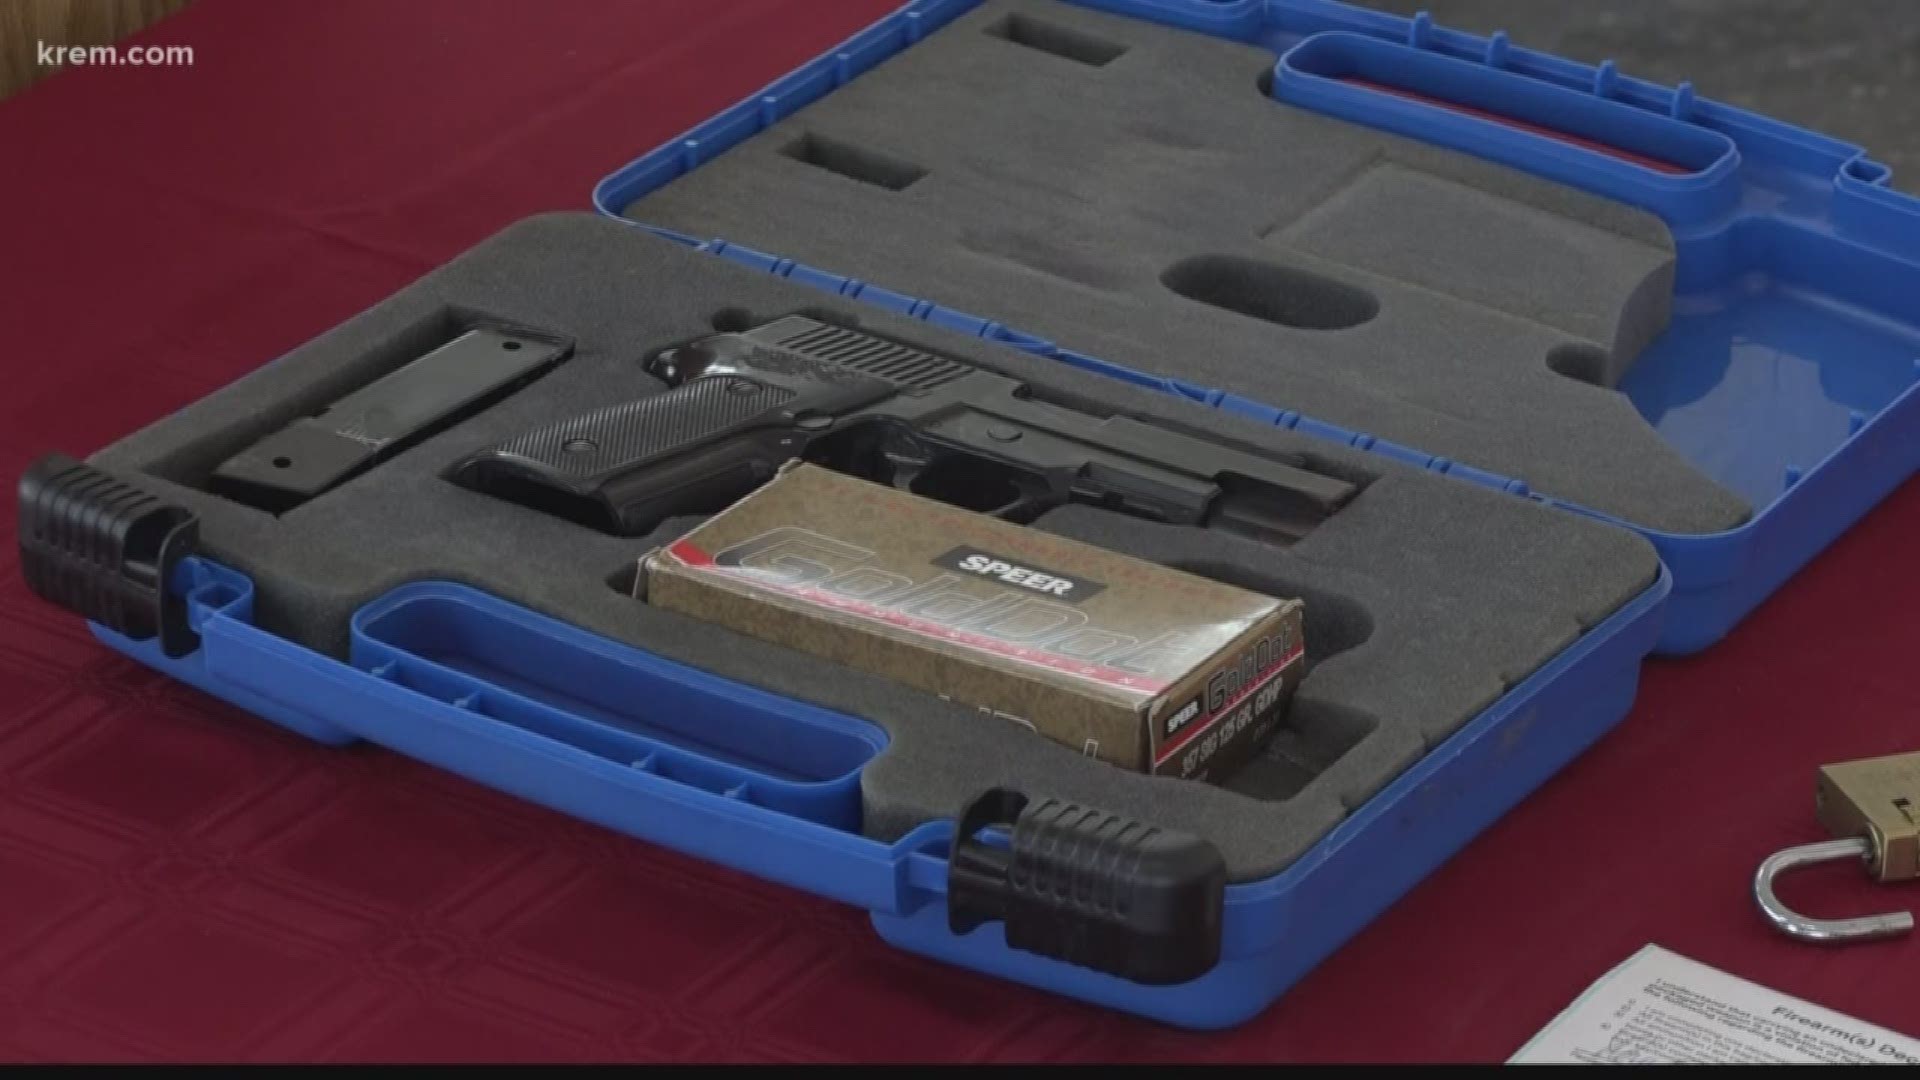 KREM Reporter Amanda Roley explains the national trend of higher incidences of firearms being found in luggage at Spokane International Airport and across the nation.